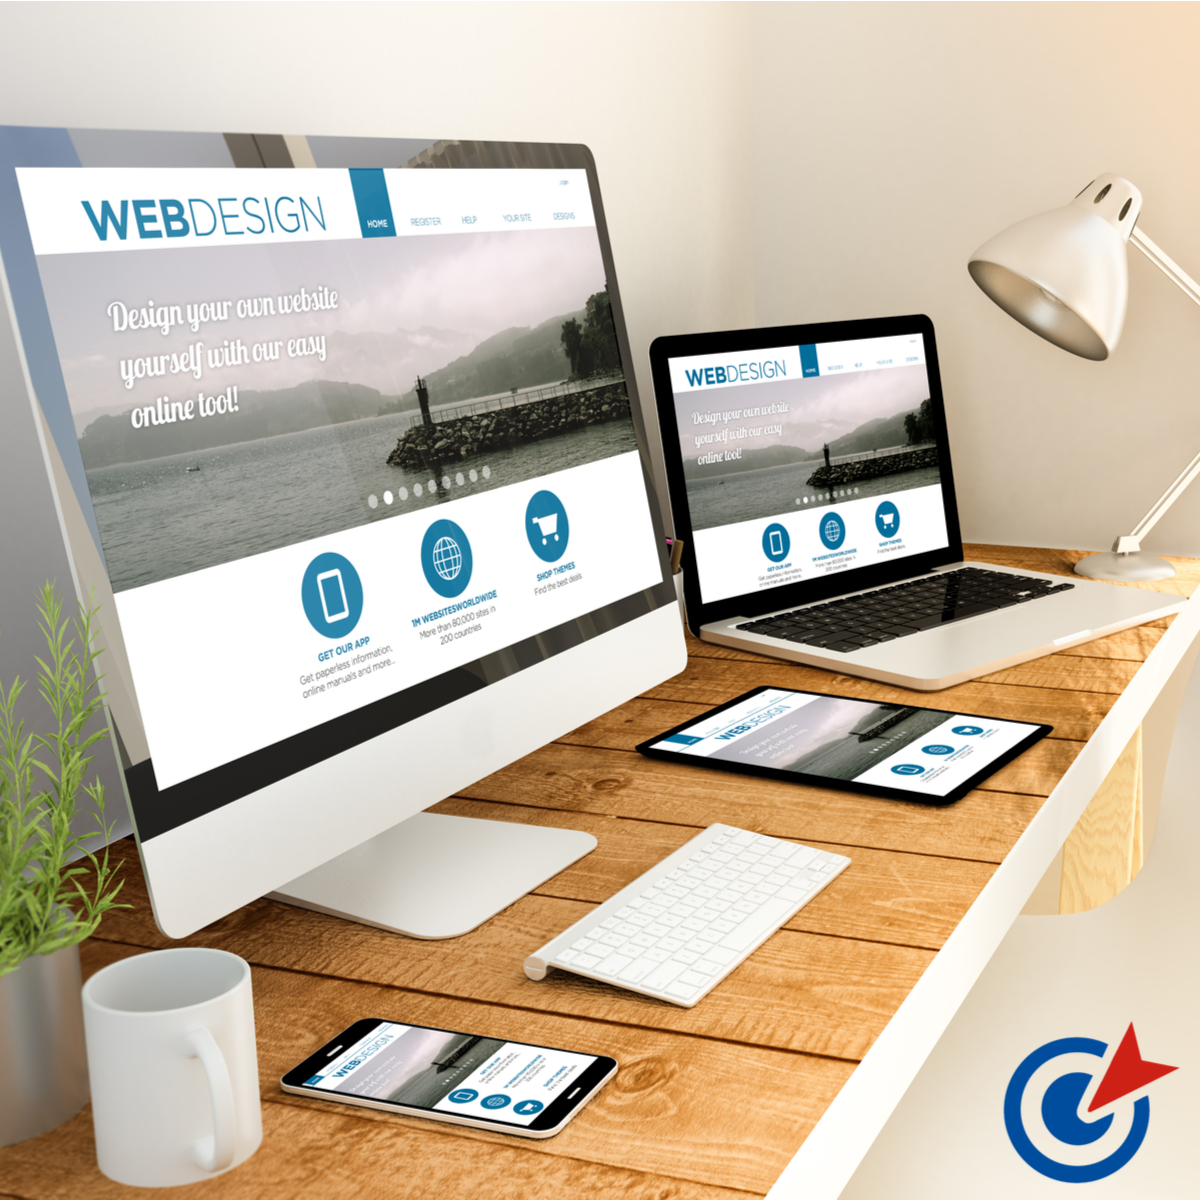 Have You Considered Outsourcing Website Services For Your Business?